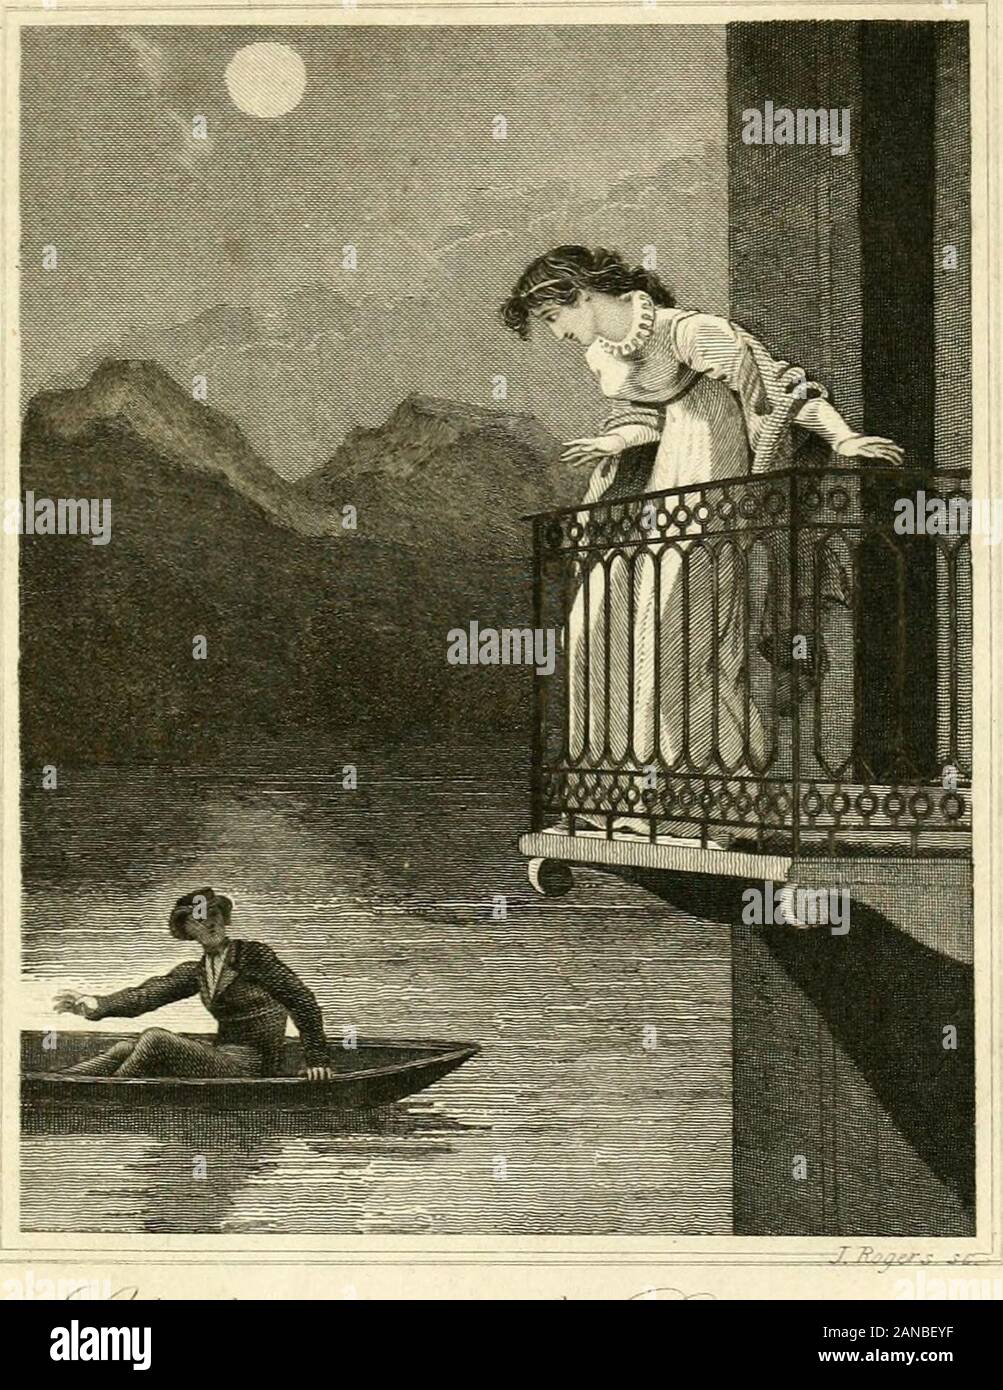 Emily Moreland, or, The maid of the valley . was not likely, either, that, if any ofthem had taken the boat to enjoy a moonlight ex-cursion, they should approach so near to the house;and, with considerable curiosity, she watched its pro-gress, until it came close under where she wasstanding. The man looked up to her, as if rather desirous ofattracting her attention than avoiding it. Shethought he spoke, and, somewhat alarmed, she was onthe point of retreating into her chamber, but a mo-ments reflection showed her the folly of apprehend-ing any danger, at the distance she was removed fromthe pe Stock Photo